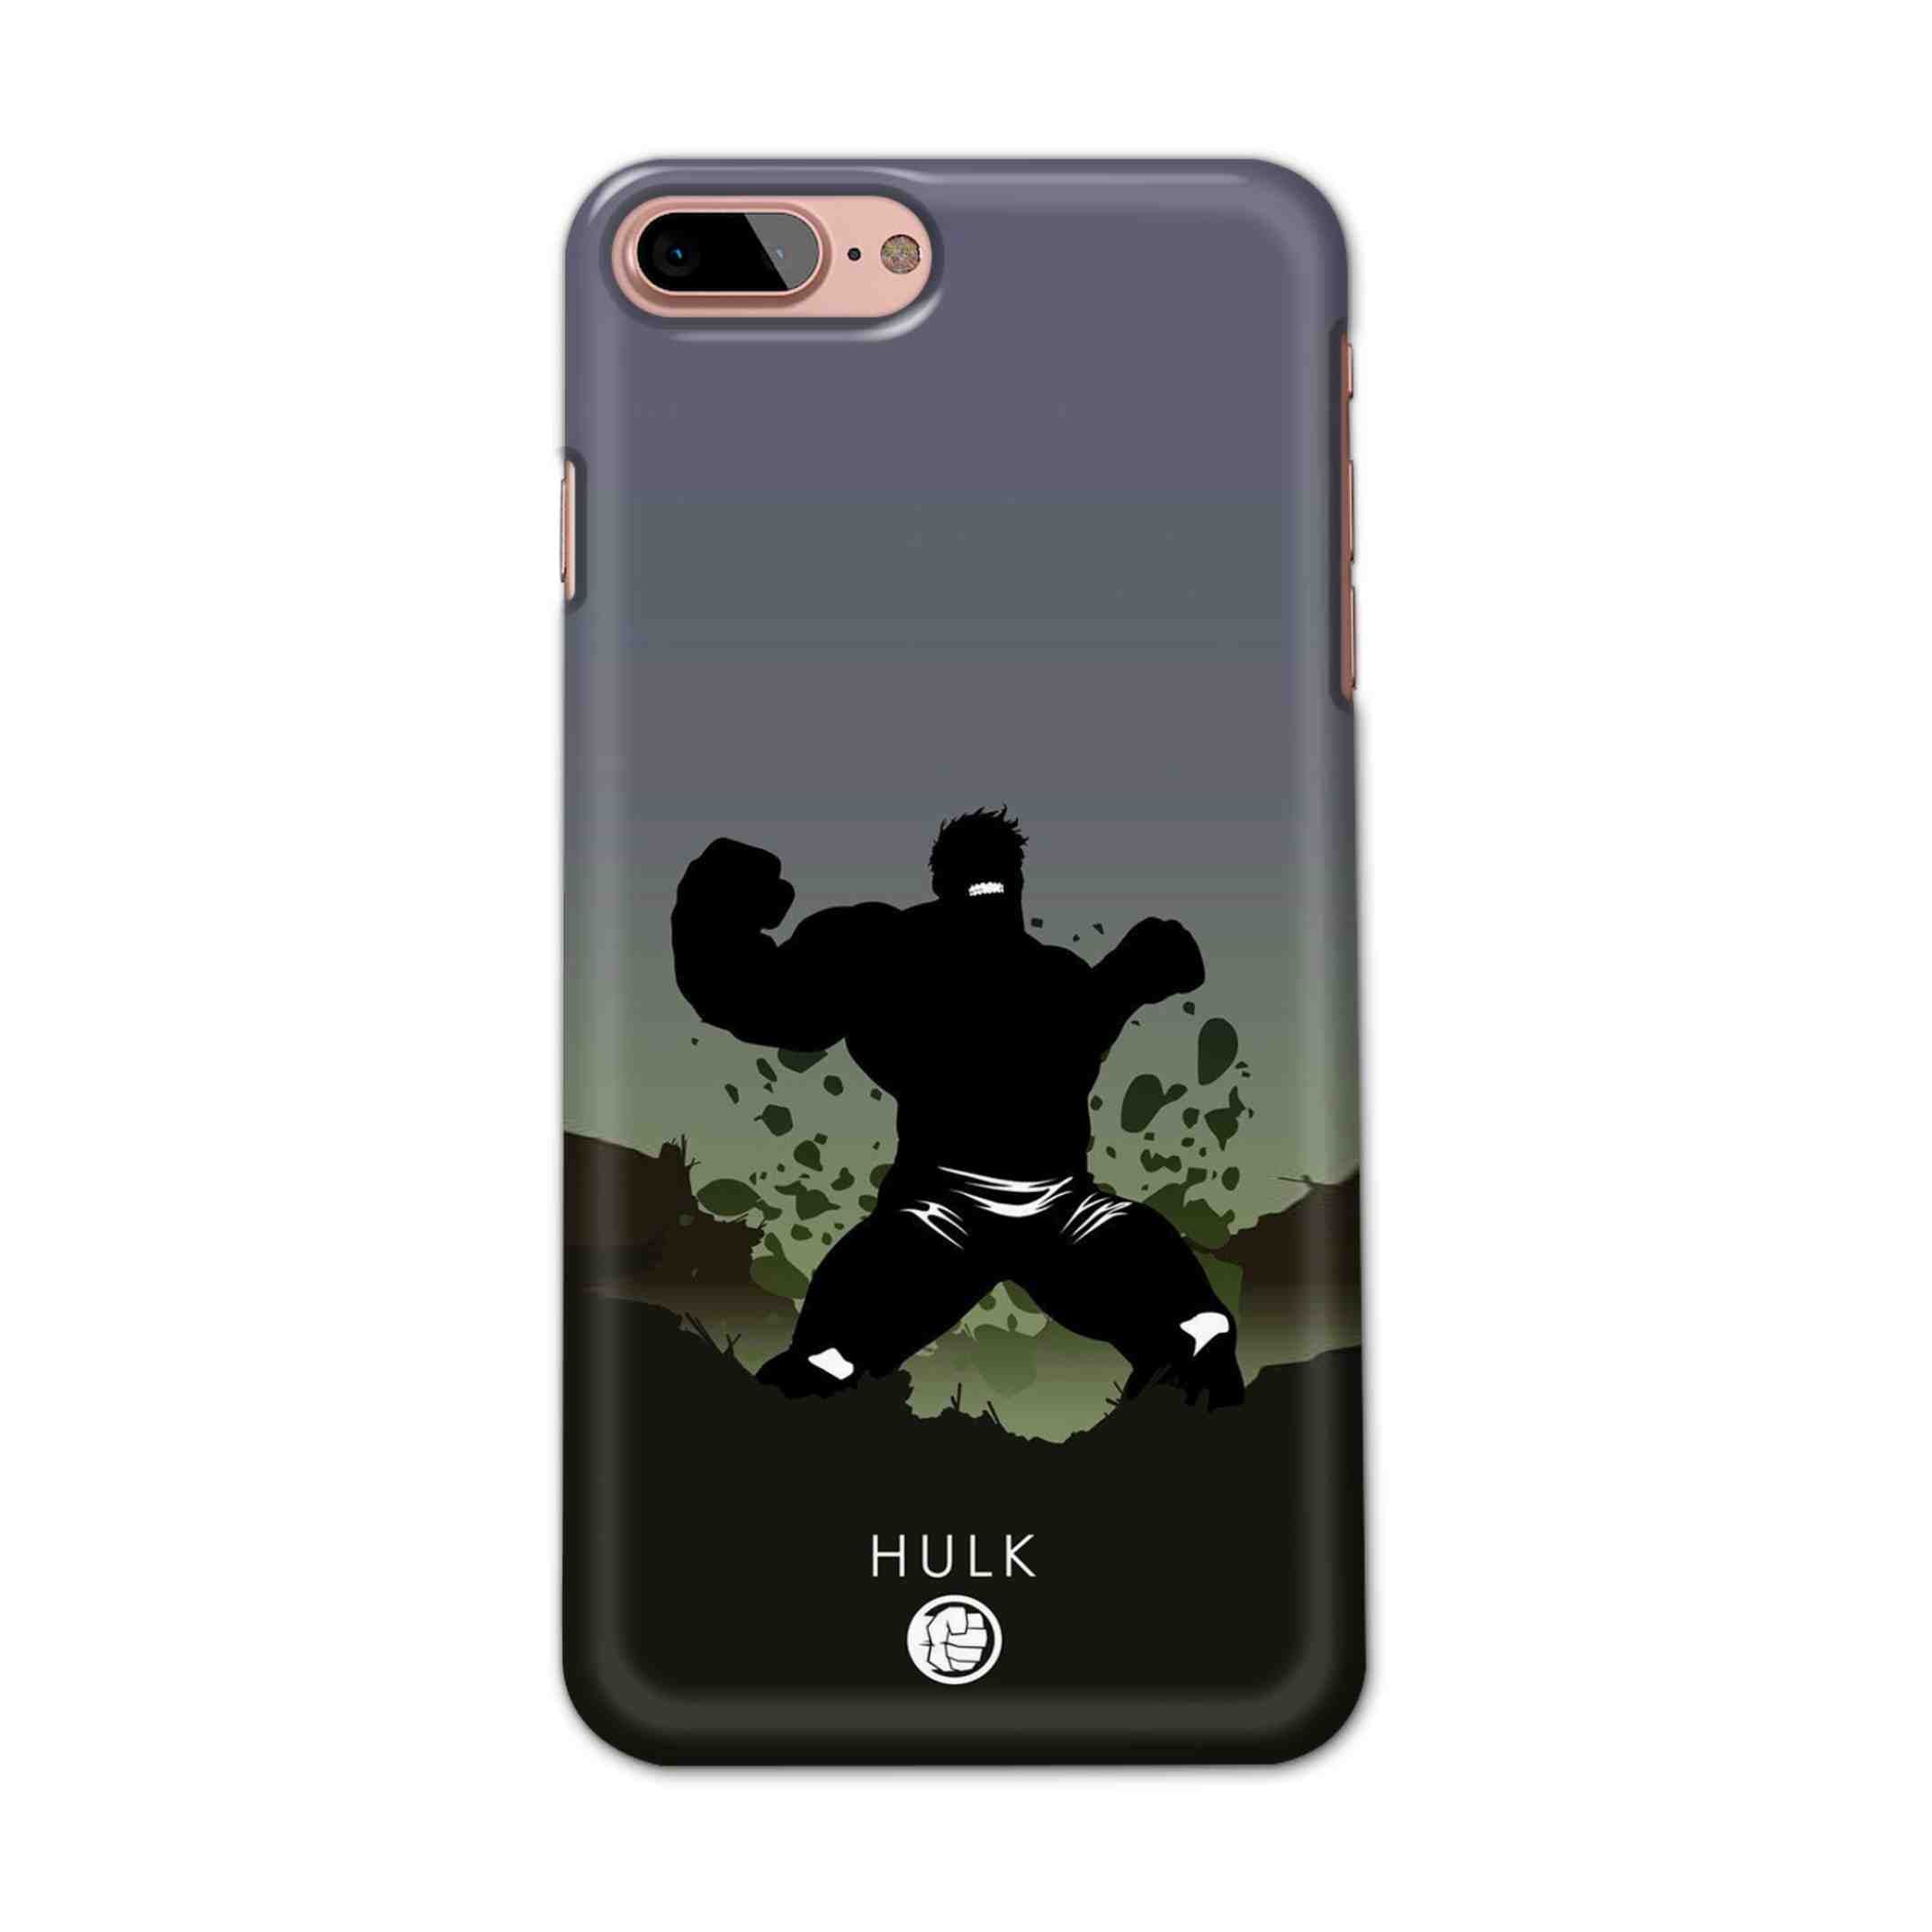 Buy Hulk Drax Hard Back Mobile Phone Case/Cover For iPhone 7 Plus / 8 Plus Online